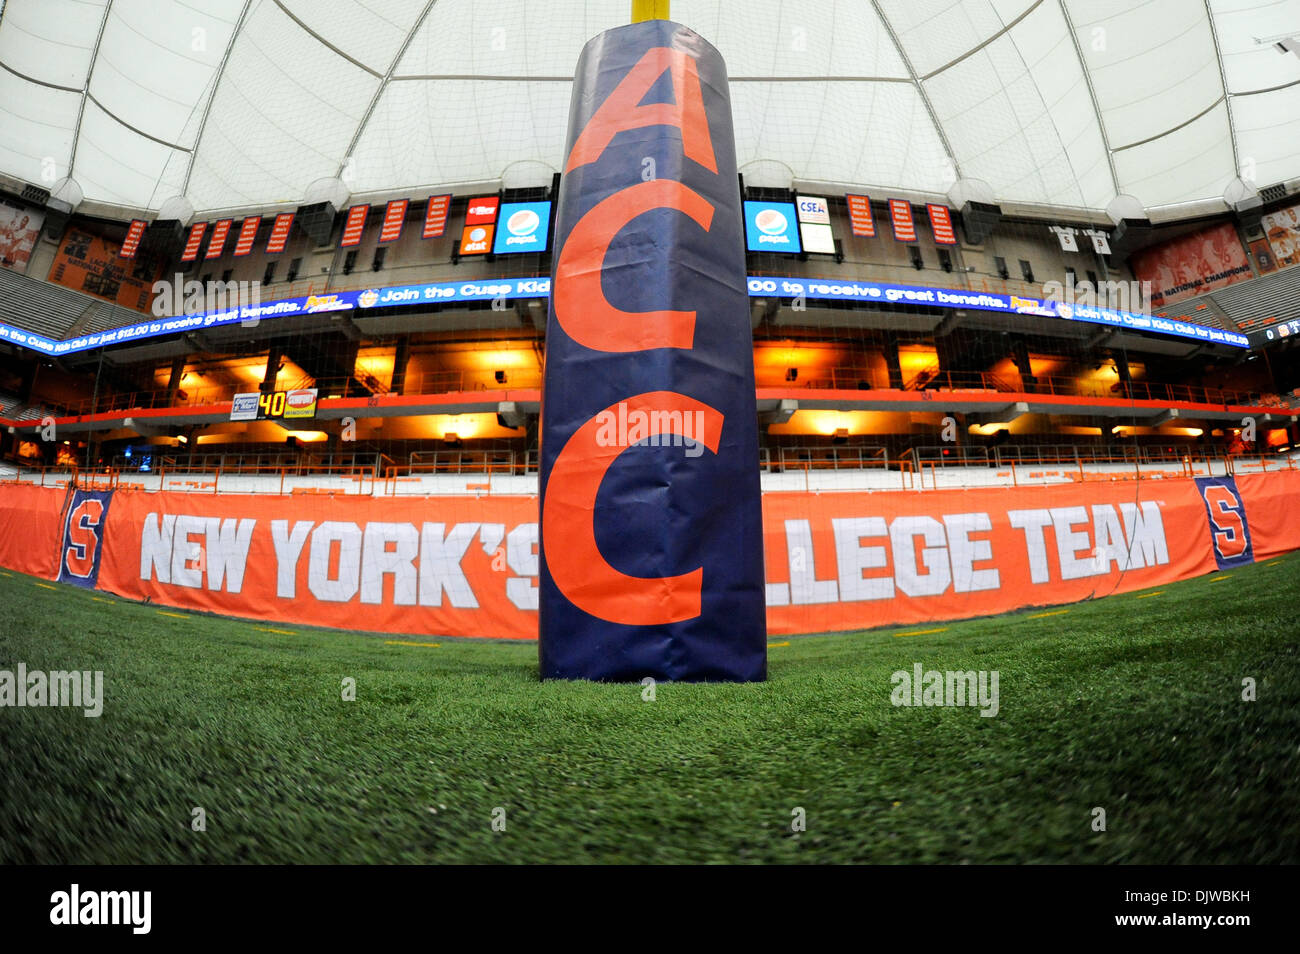 Syracuse, New York, USA. 30th Nov, 2013. November 30, 2013: General view of an Atlantic Coast Conference field goal cover prior to an NCAA Football game between the Boston College Eagles and the Syracuse Orange at the Carrier Dome in Syracuse, New York. Rich Barnes/CSM/Alamy Live News Stock Photo